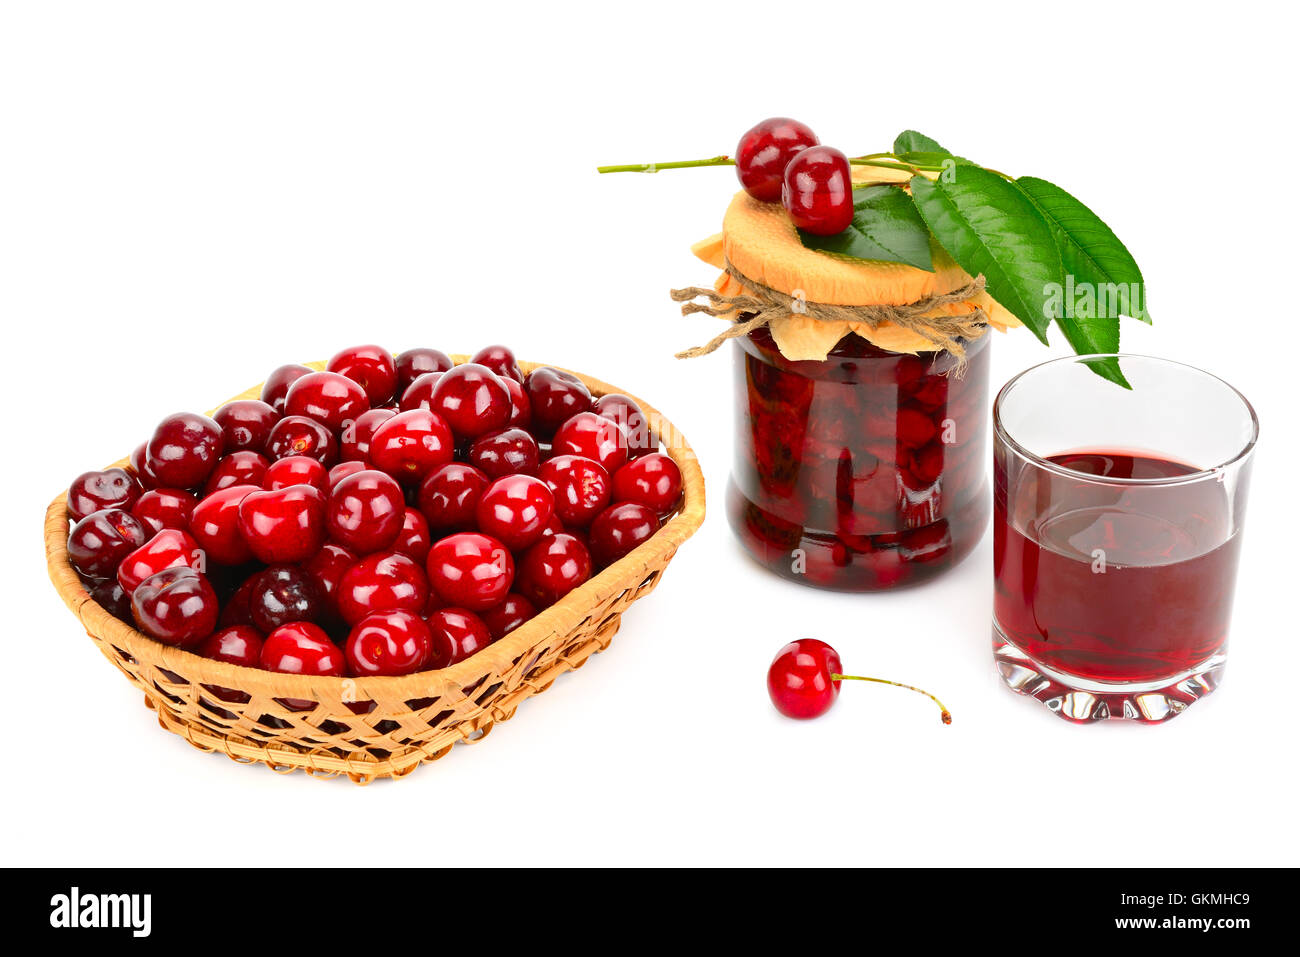 Glass of juice, basket of cherries and jar of jam isolated on white background Stock Photo